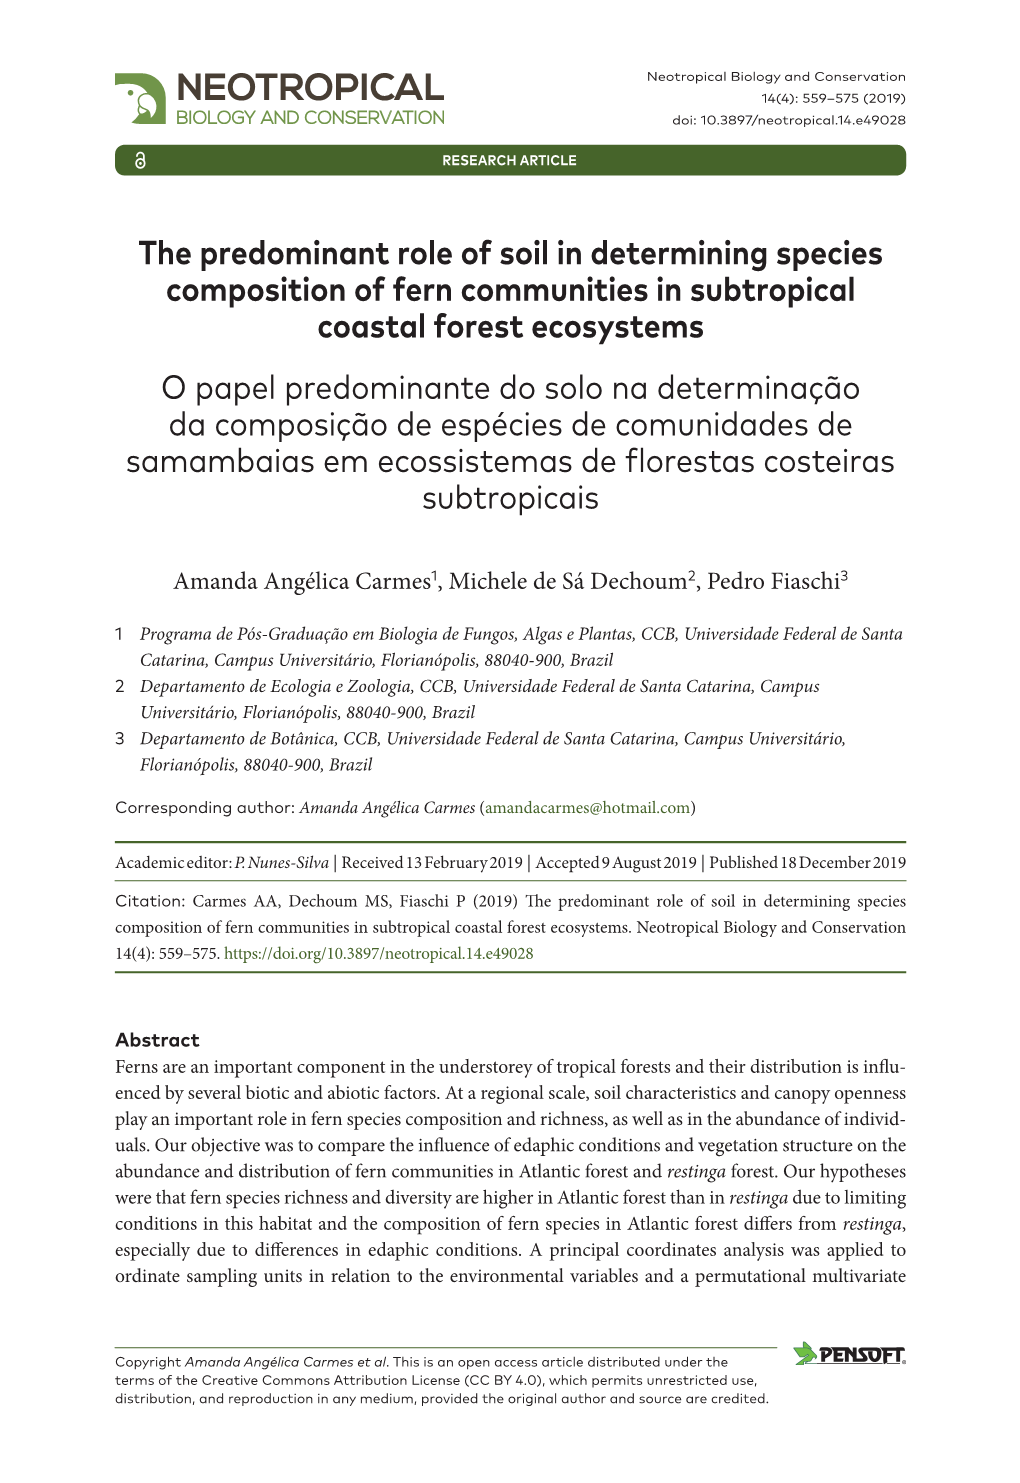 ﻿The Predominant Role of Soil in Determining Species Composition Of